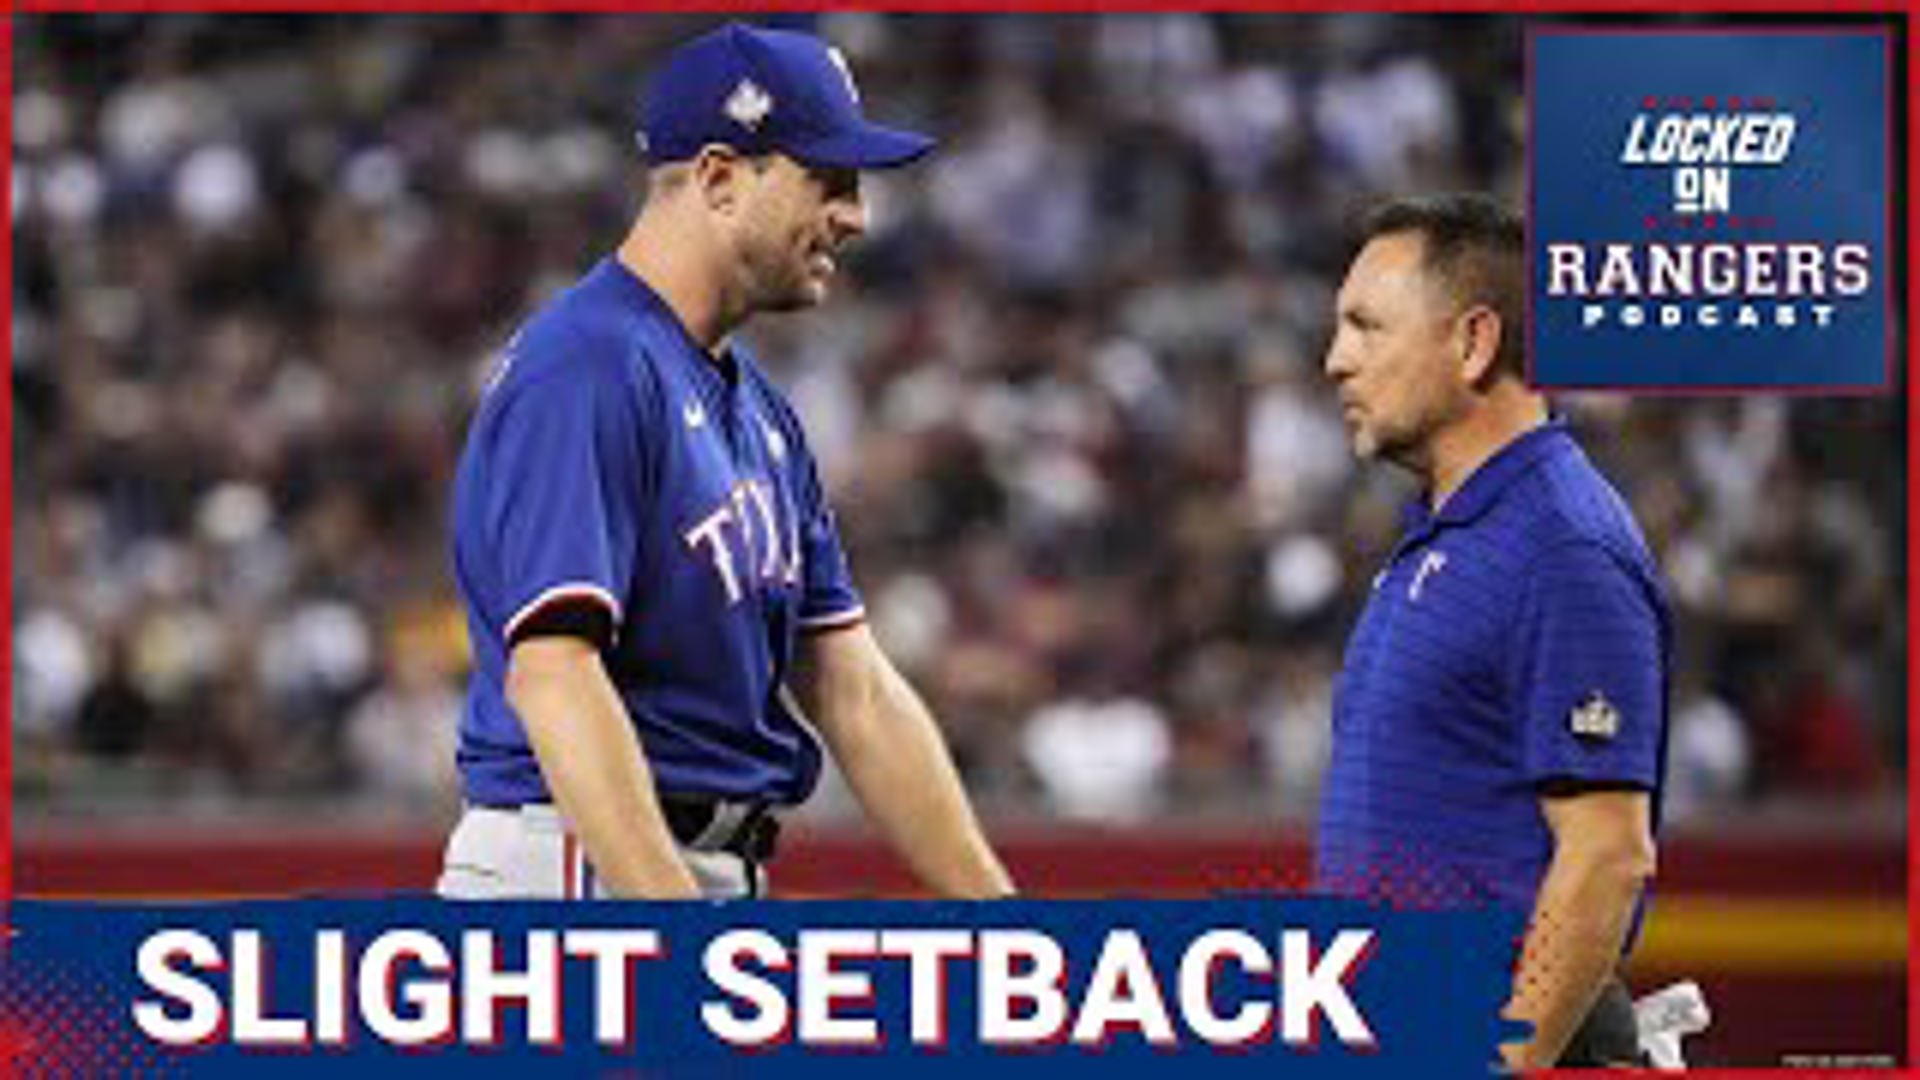 Texas Rangers future HOFer Max Scherzer was scratched from his second rehab start with a thumb issue which will delay his return form injury.